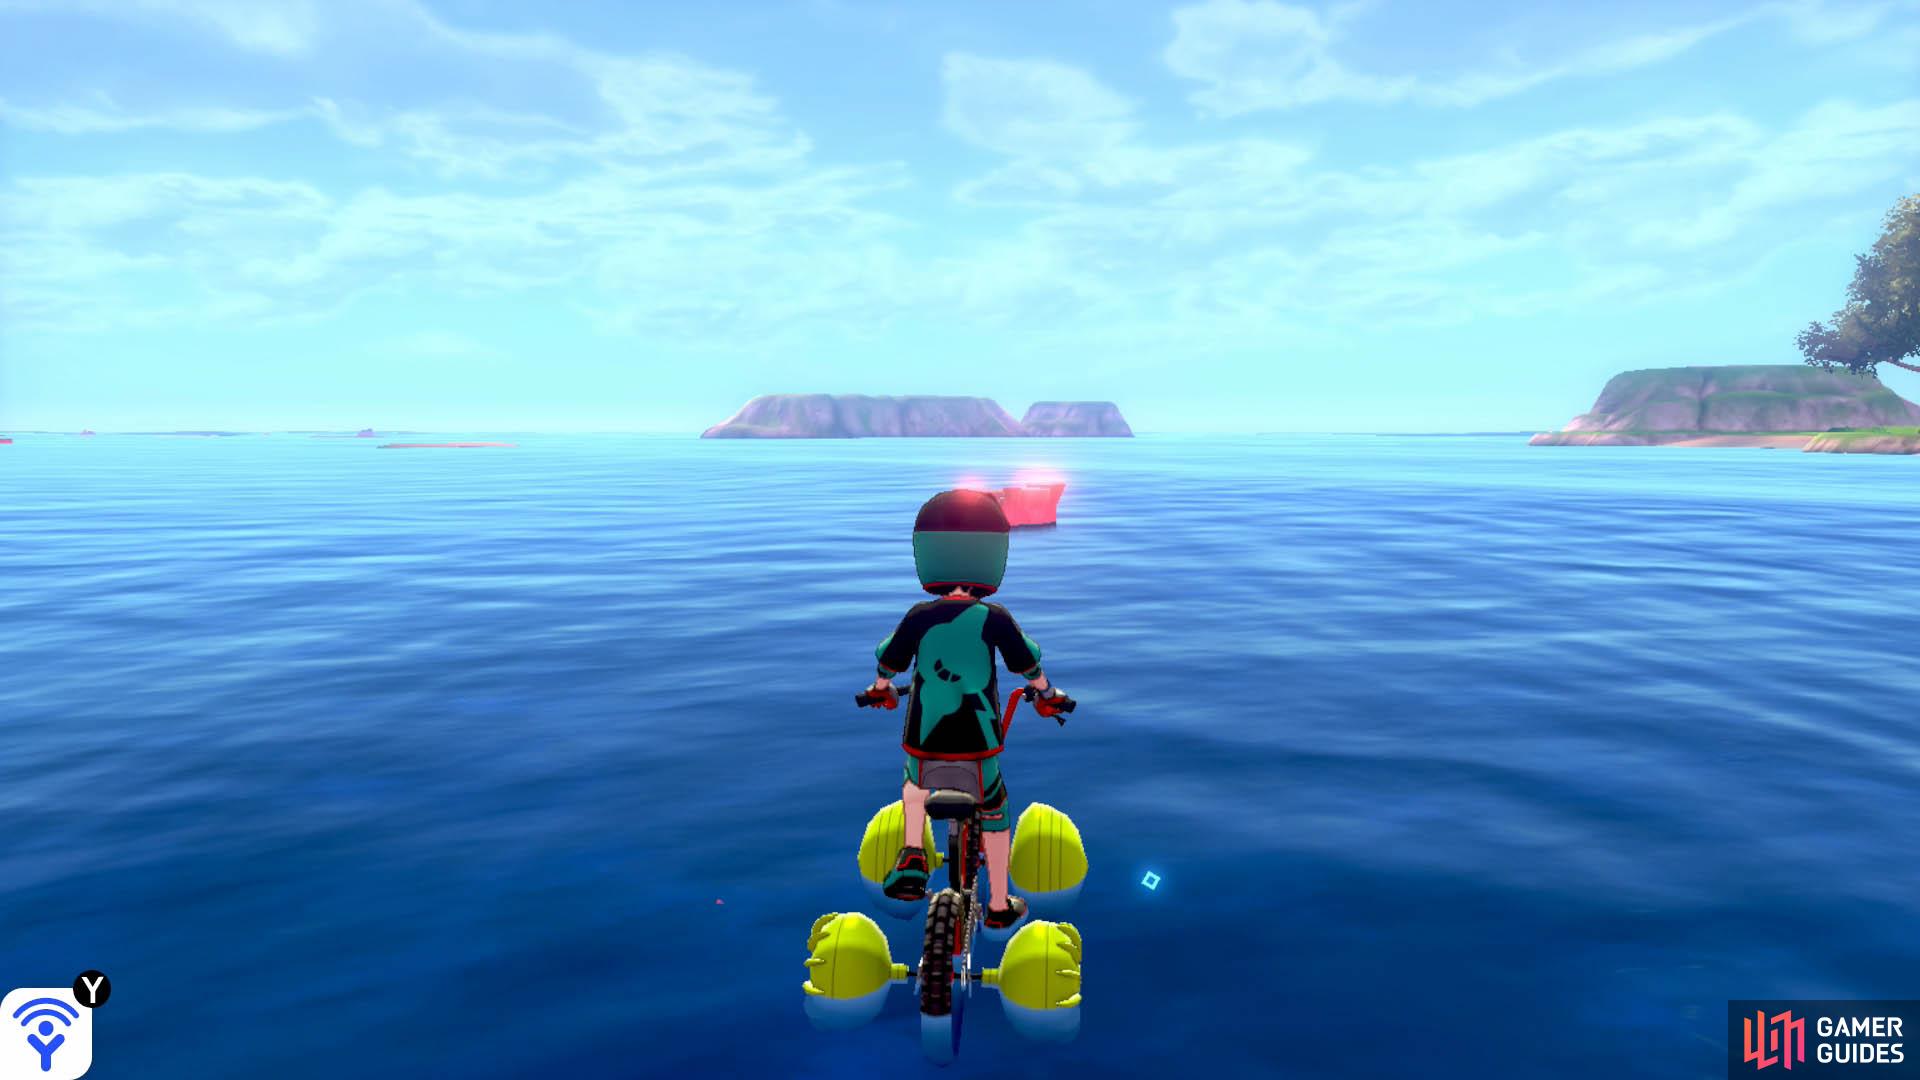 From the Tower of Waters on Challenge Beach, go to the left side of the tower (while facing the tower entrance) and, with your back to the tower, swim straight ahead. It’s halfway between the tower and the elongated pair of islands, near the transition into Stepping-Stone Sea. Expect a Sharpedo coming your way.